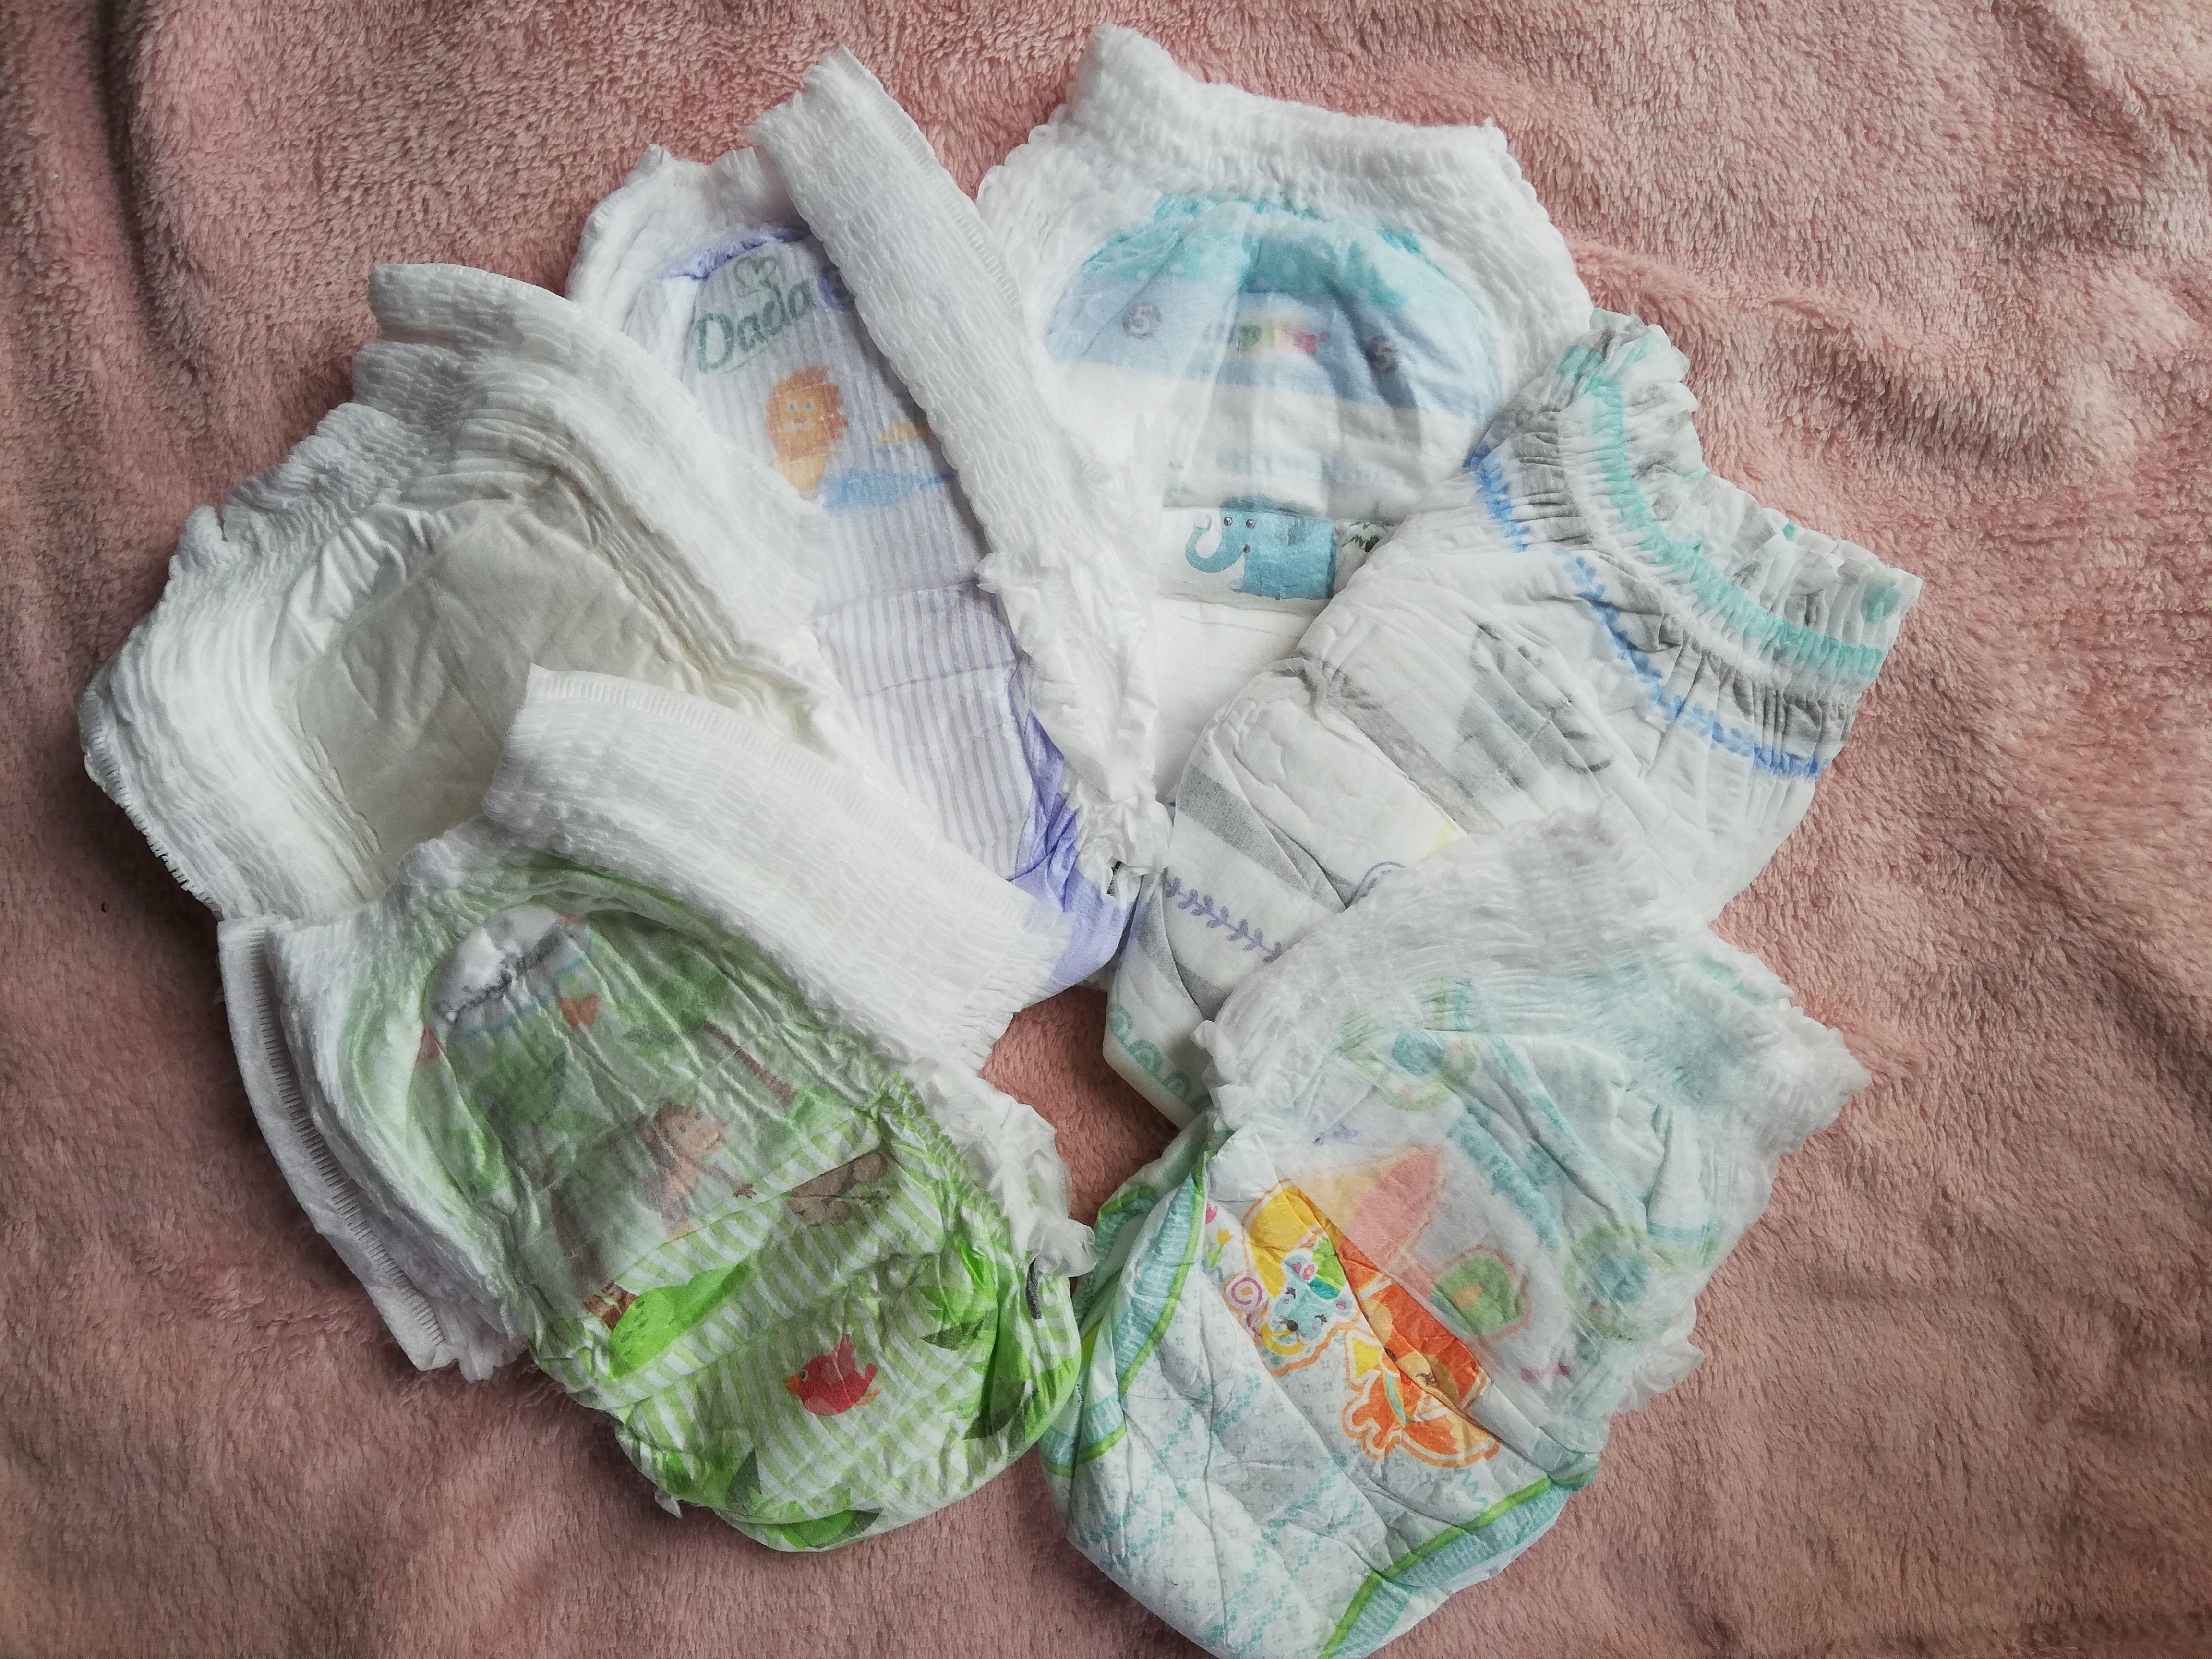 pampers premium care 2 emag